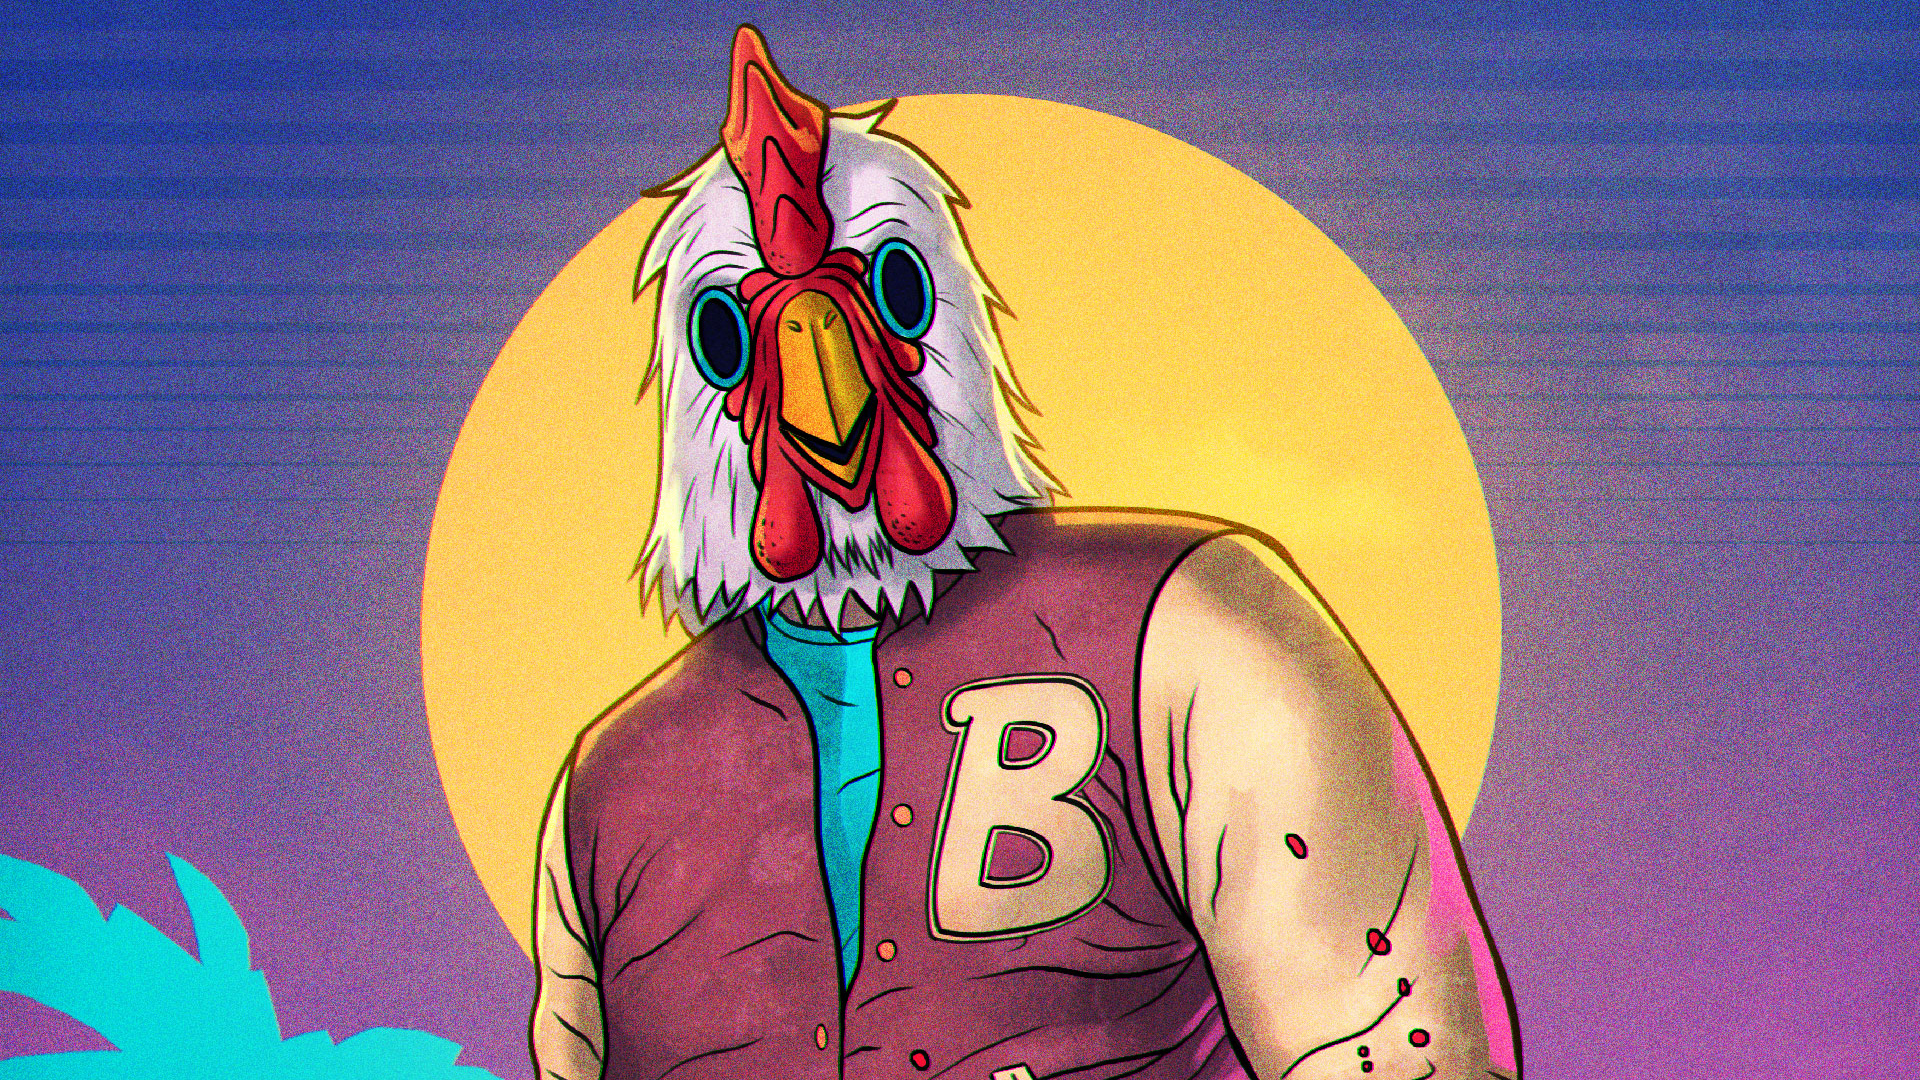 hotline miami, video game, hotline miami 2: wrong number